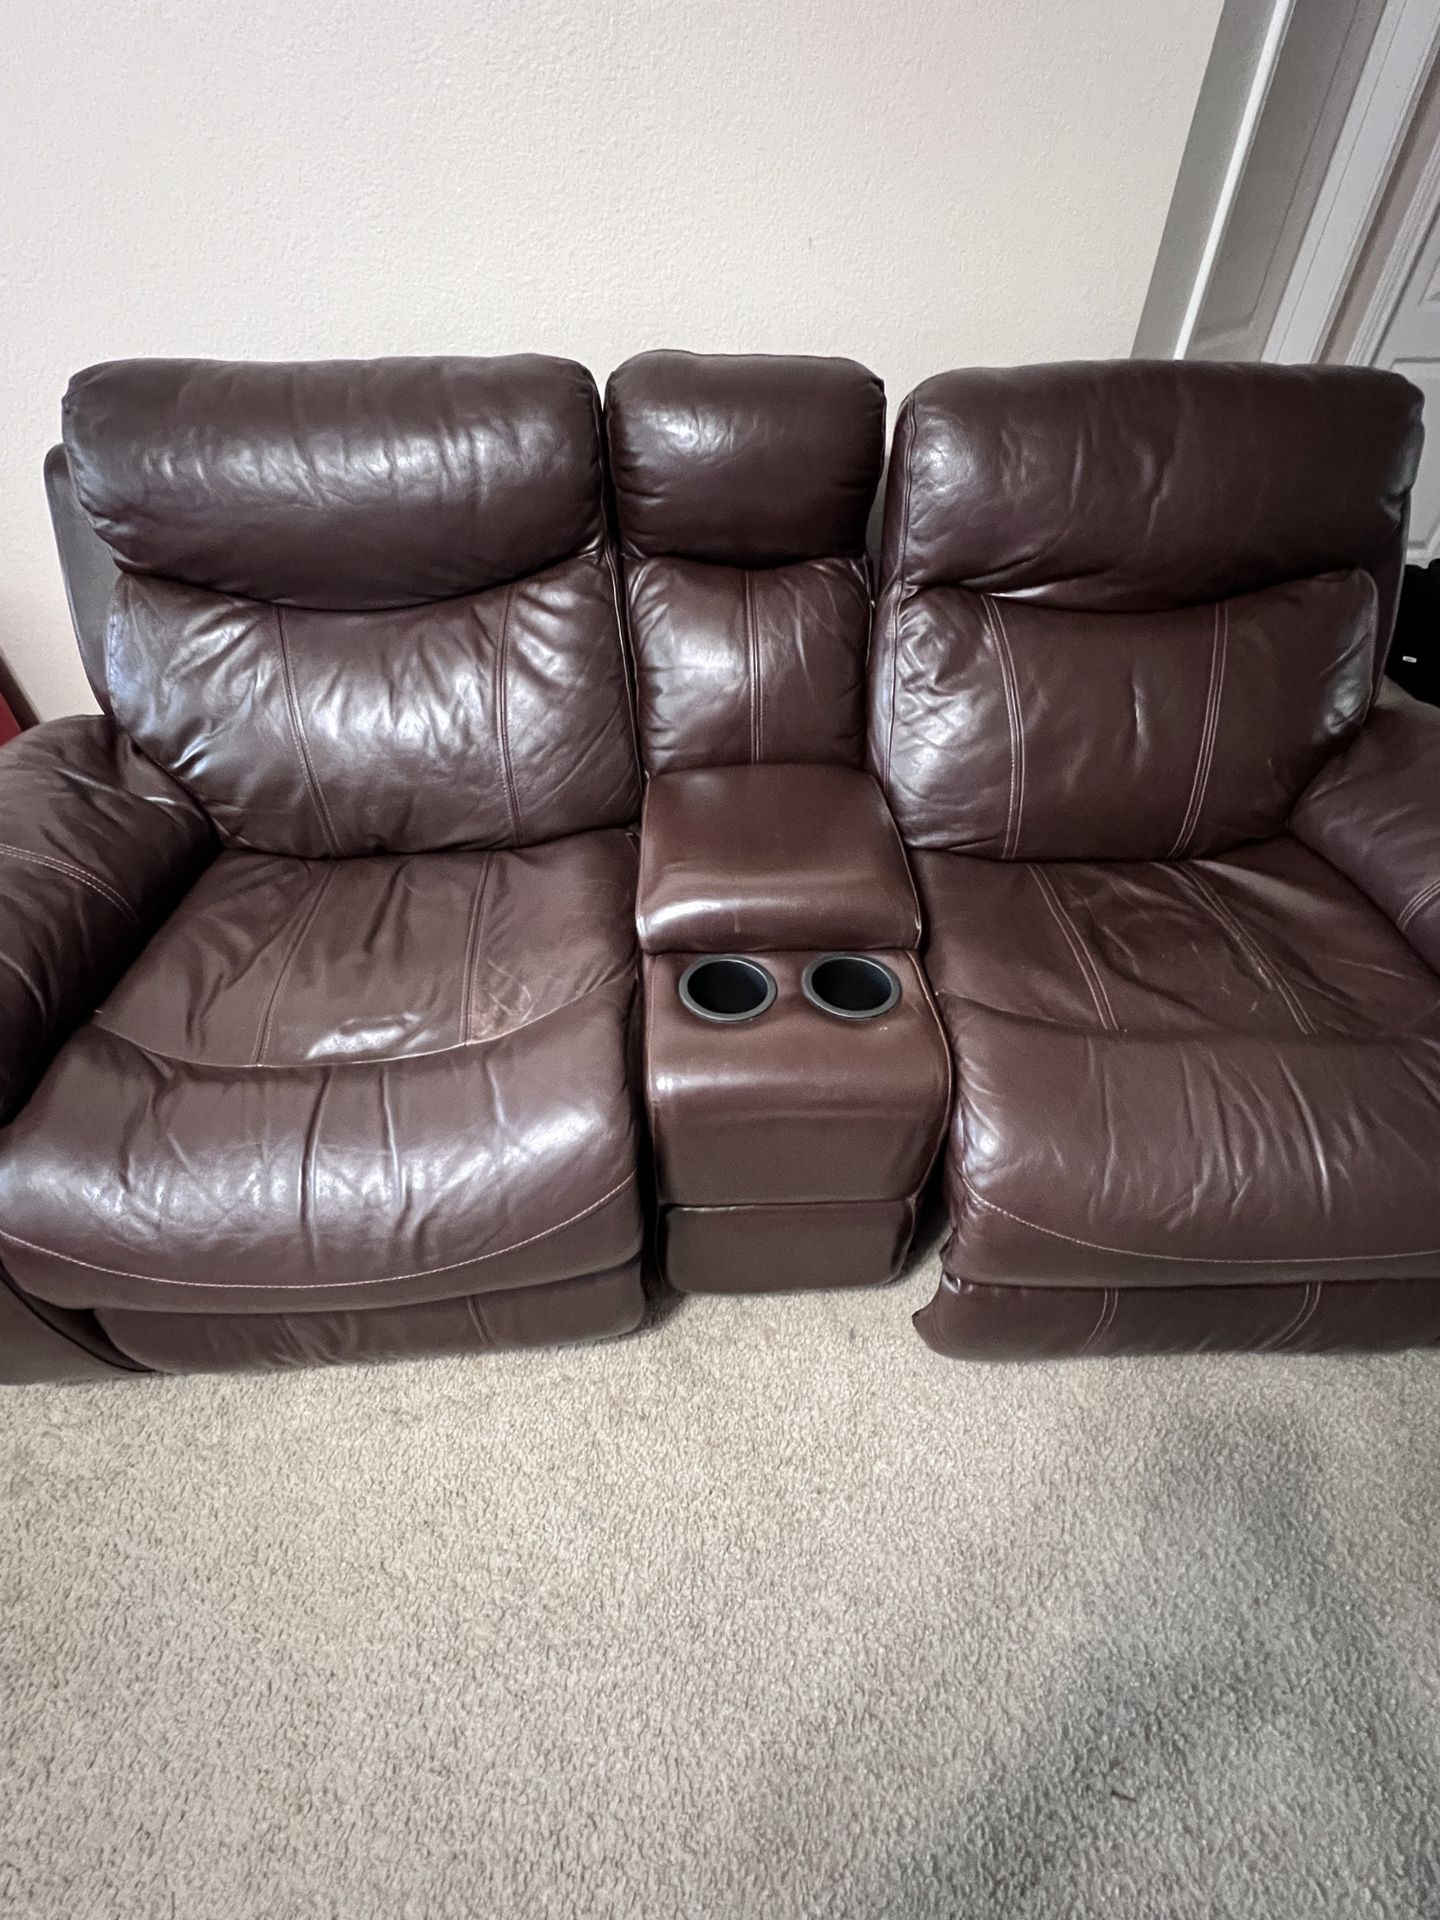 Double recliner Chairs